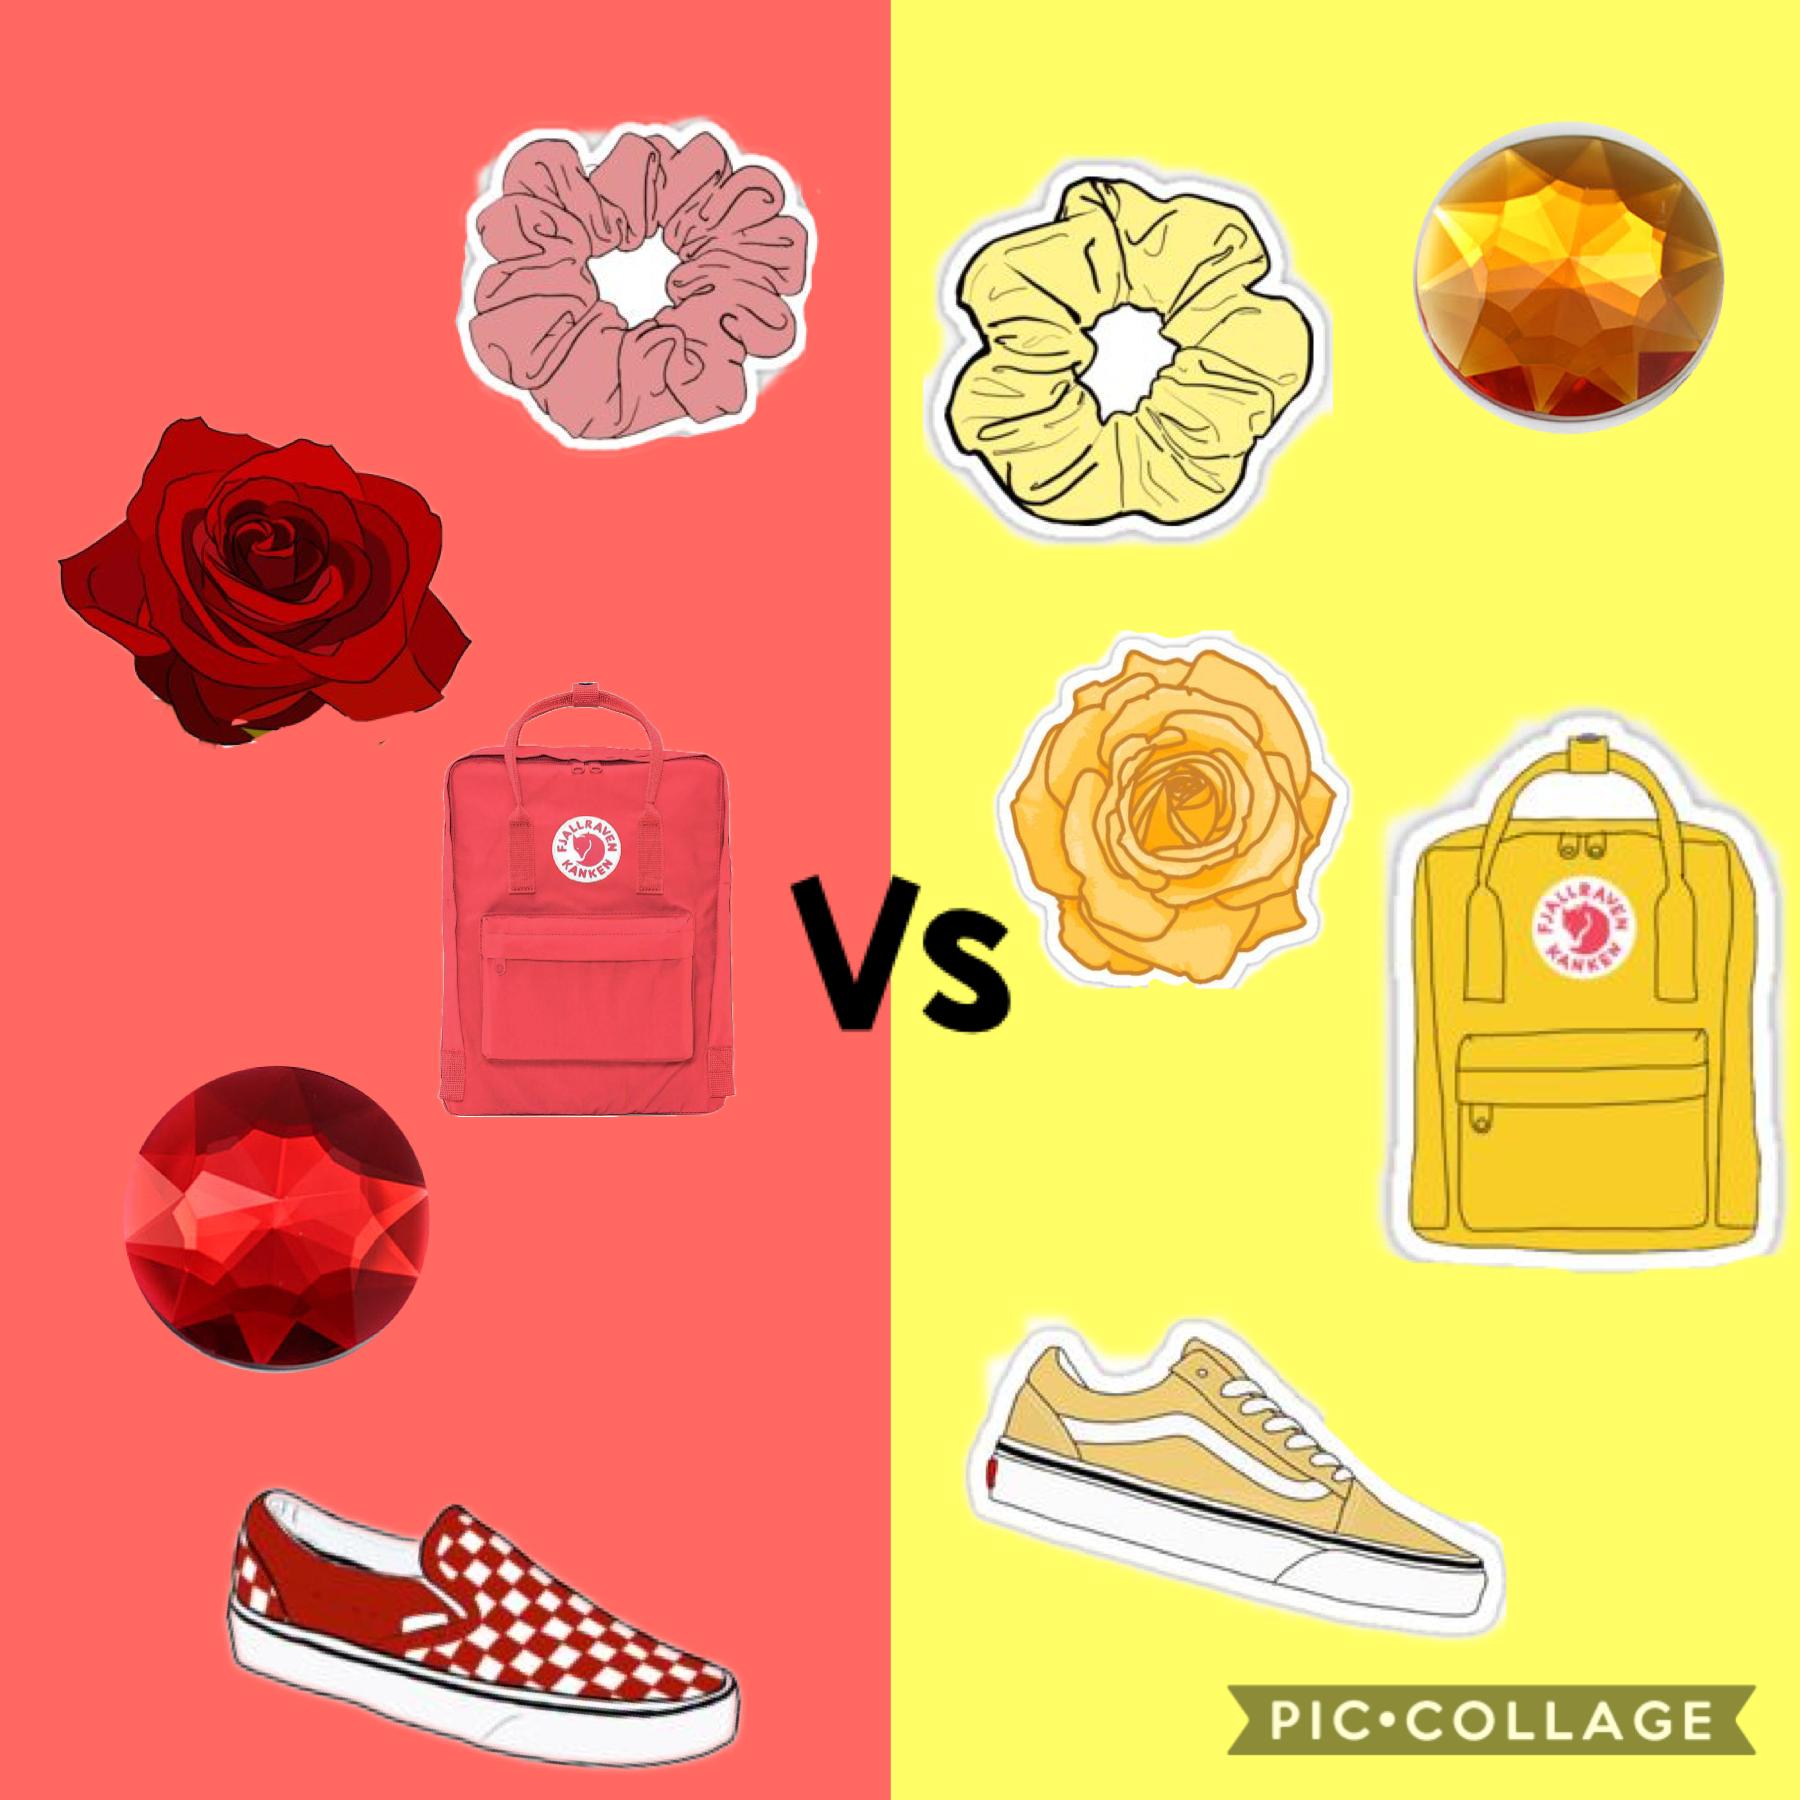 Another one of these ... which one do u prefer? Red or yellow? 
❤️🎈🍎🌹💛✨🌼🌻⭐️